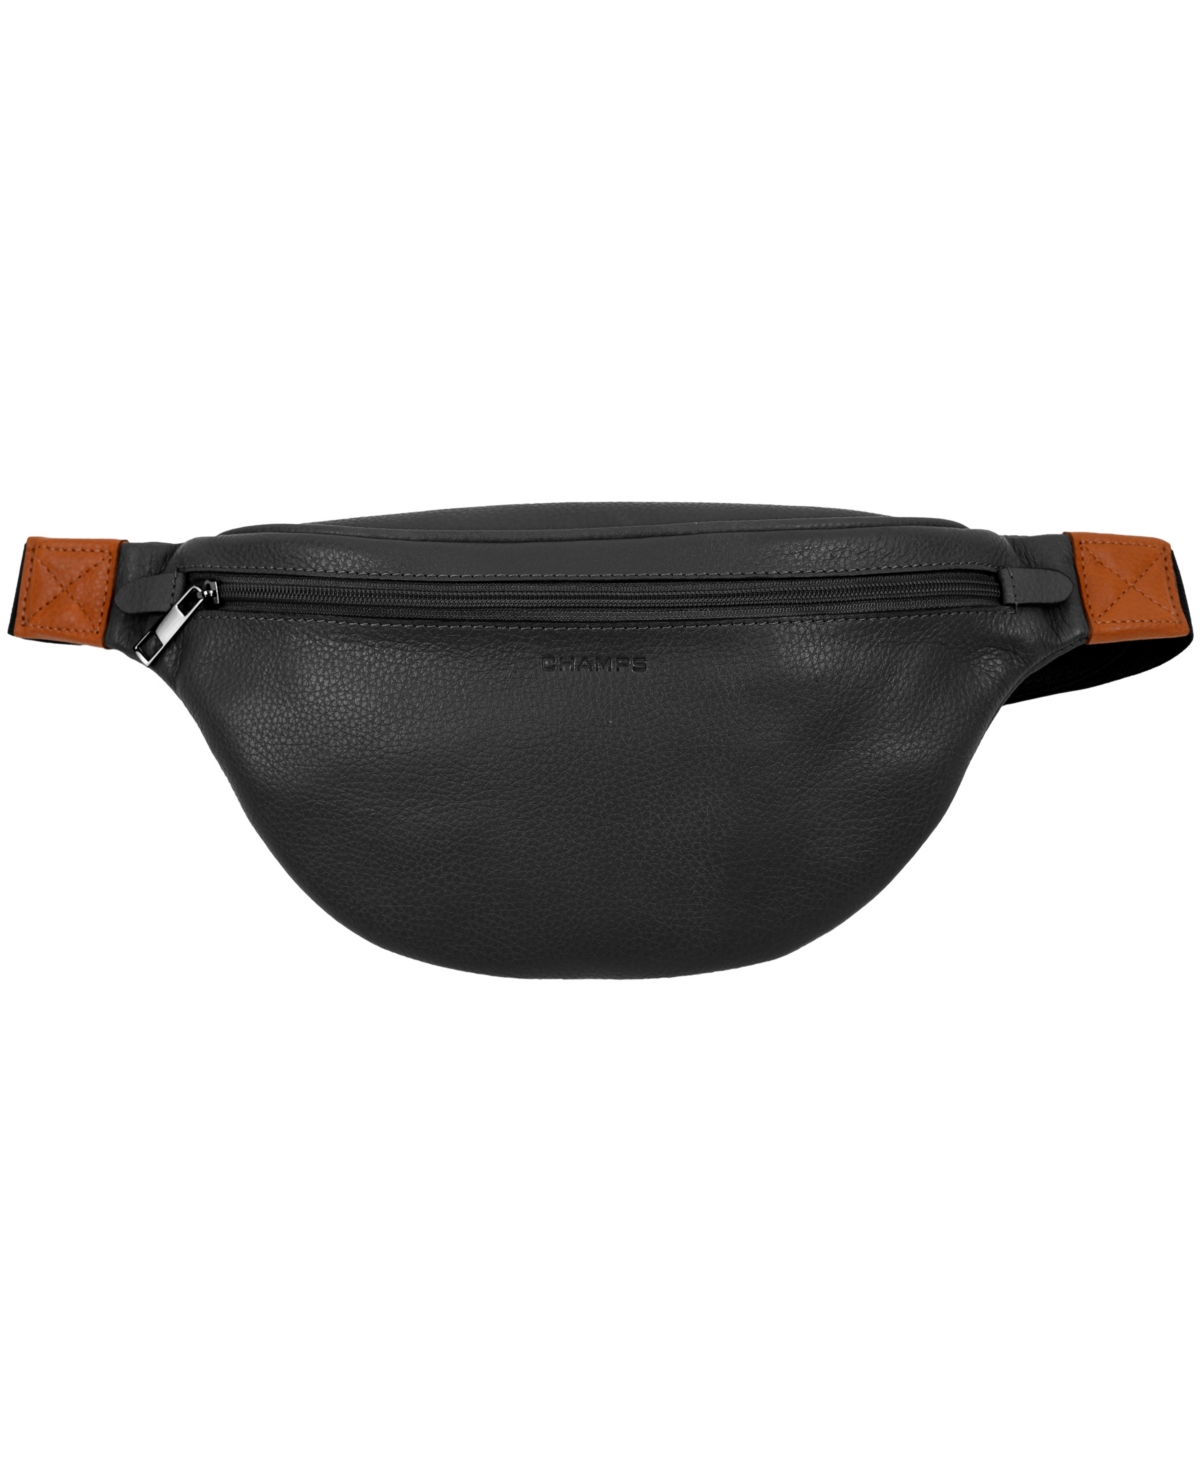 Champs Onyx Leather Waist Pack In Black